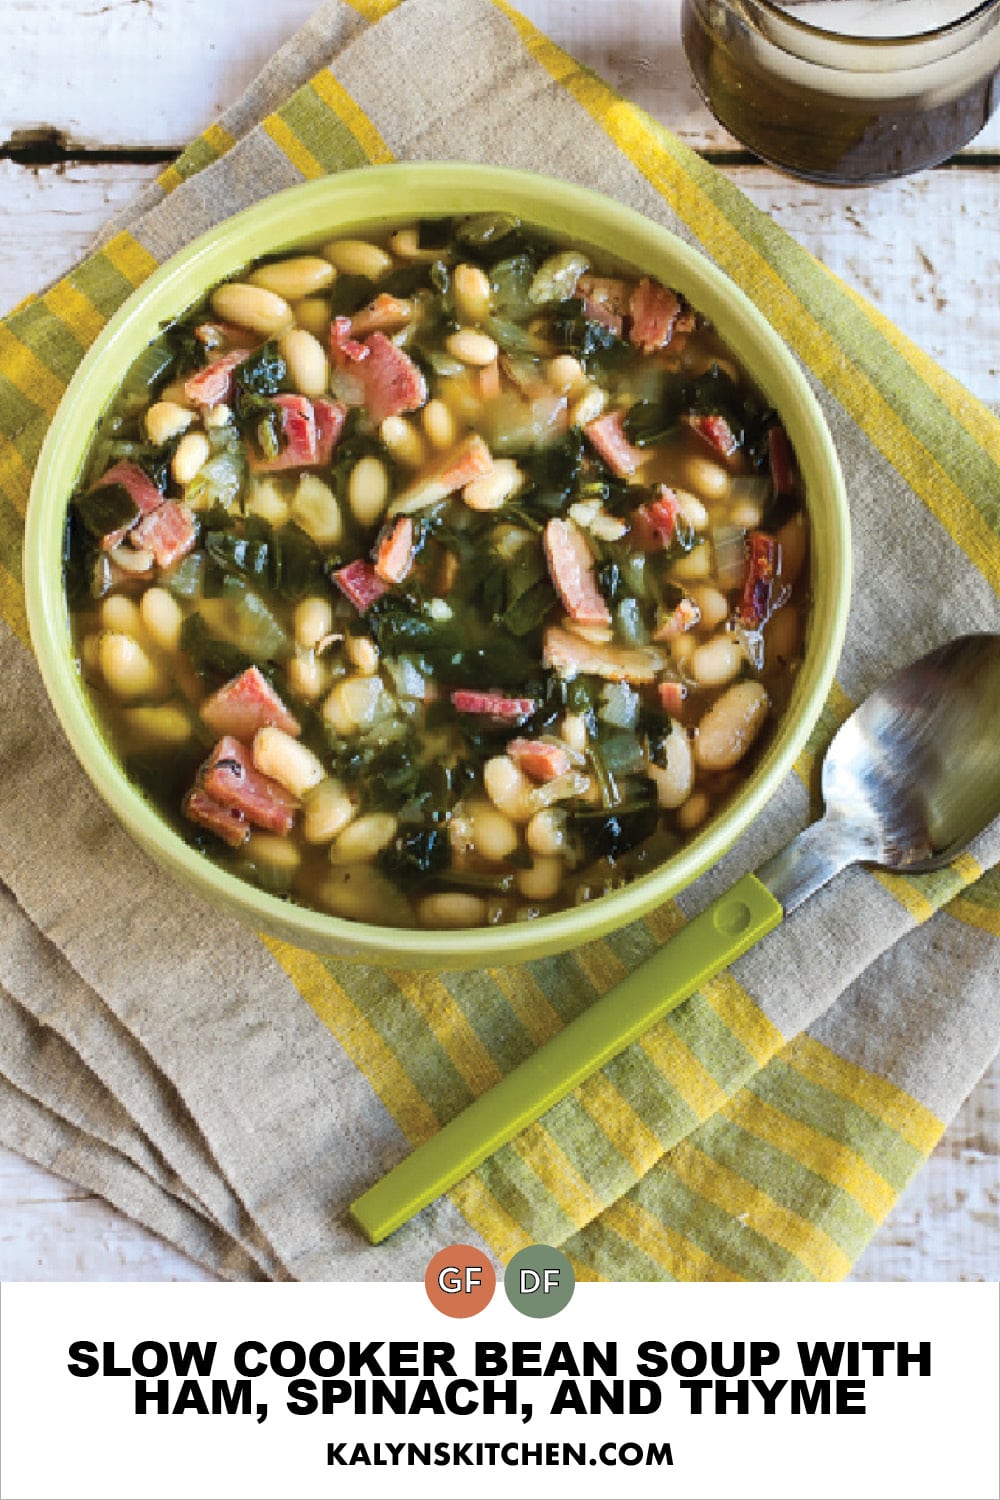 Pinterest image of Slow Cooker Bean Soup with Ham, Spinach, and Thyme